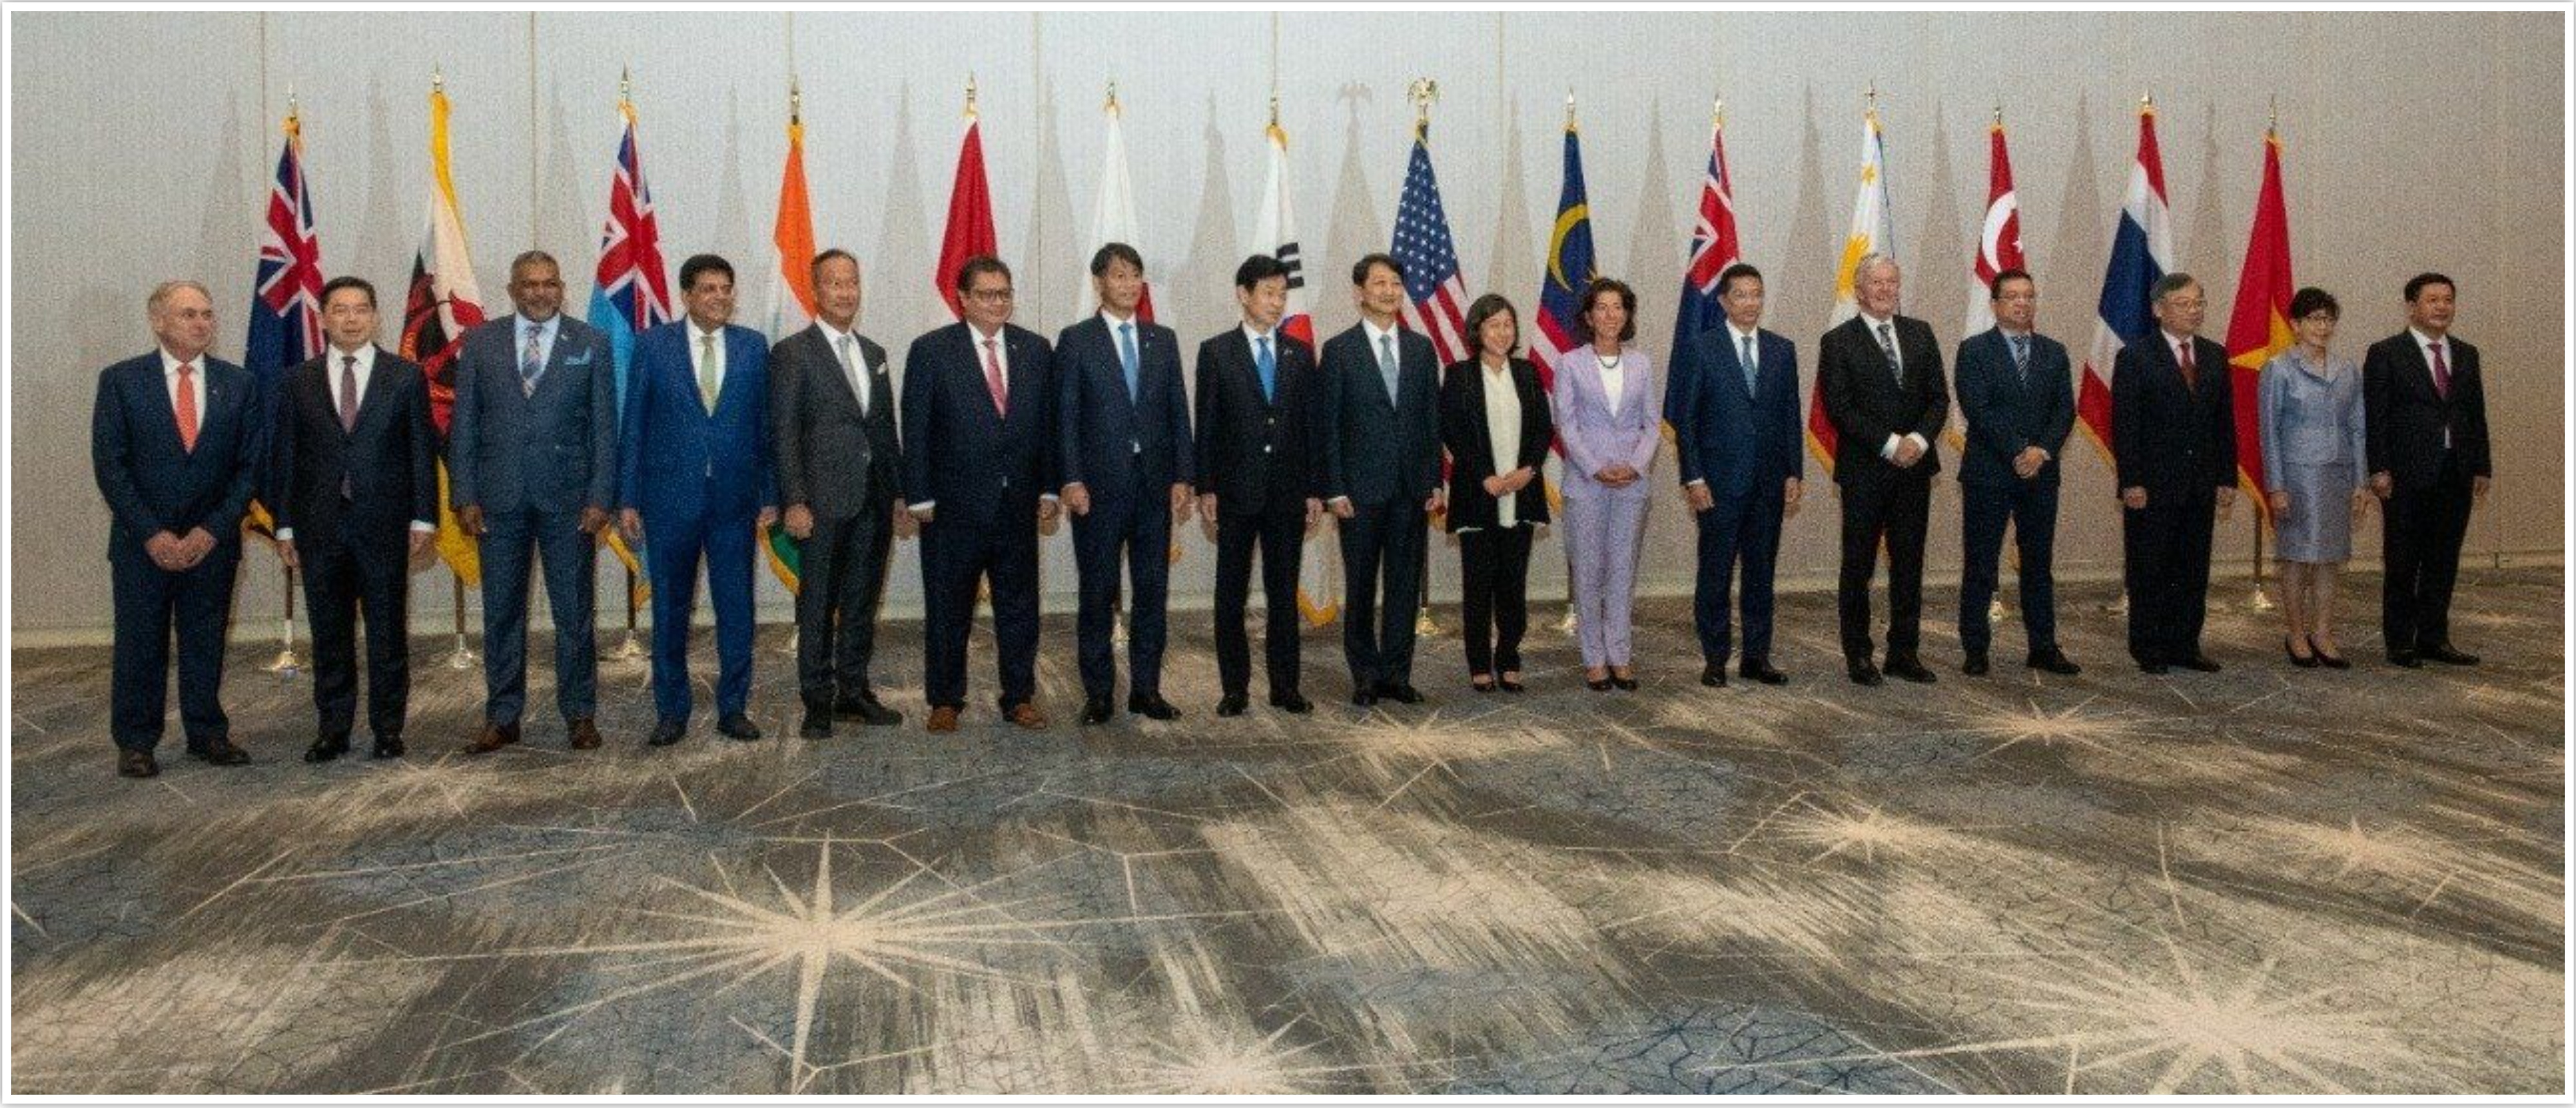  Union Minister of Commerce and Industry, Consumer Affairs, Food and Public Distribution and Textiles, Mr. Piyush Goyal attended the first  in-person Ministerial meeting of the India-Pacific Economic Forum (IPEF) in Los Angeles